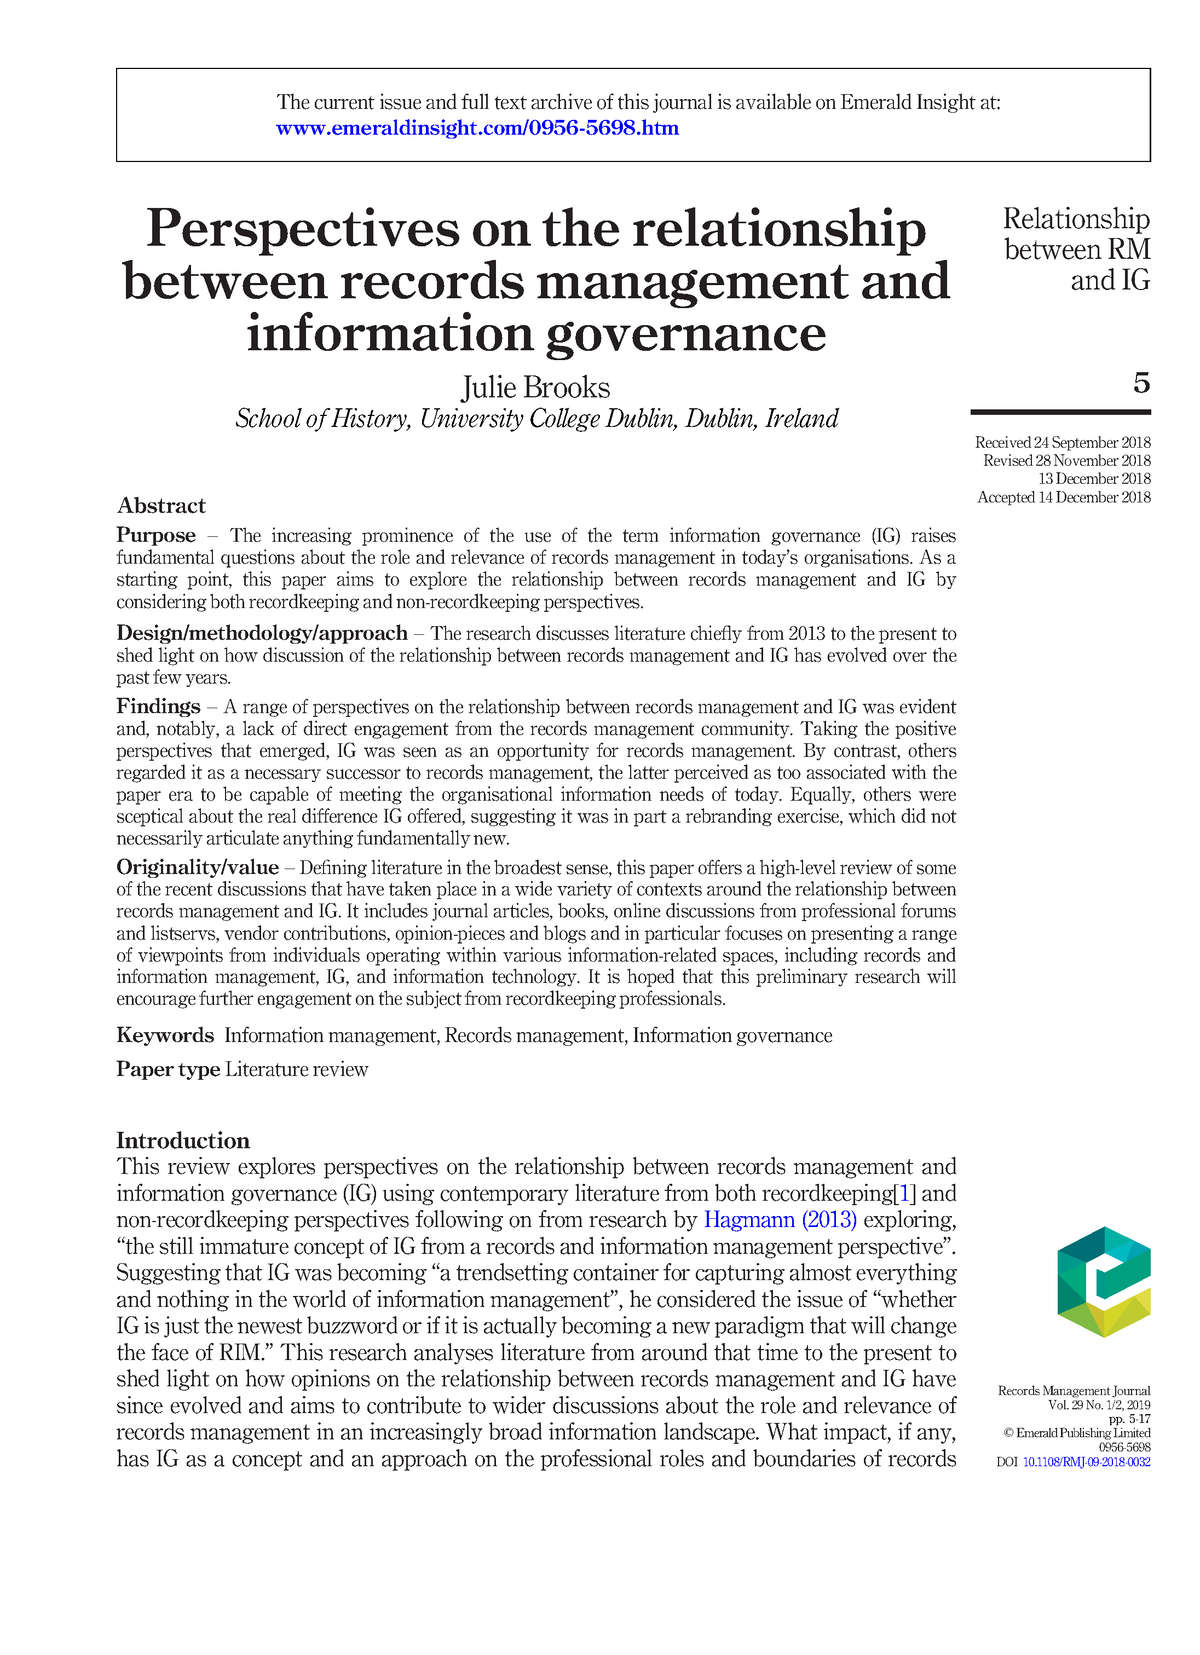 records management thesis